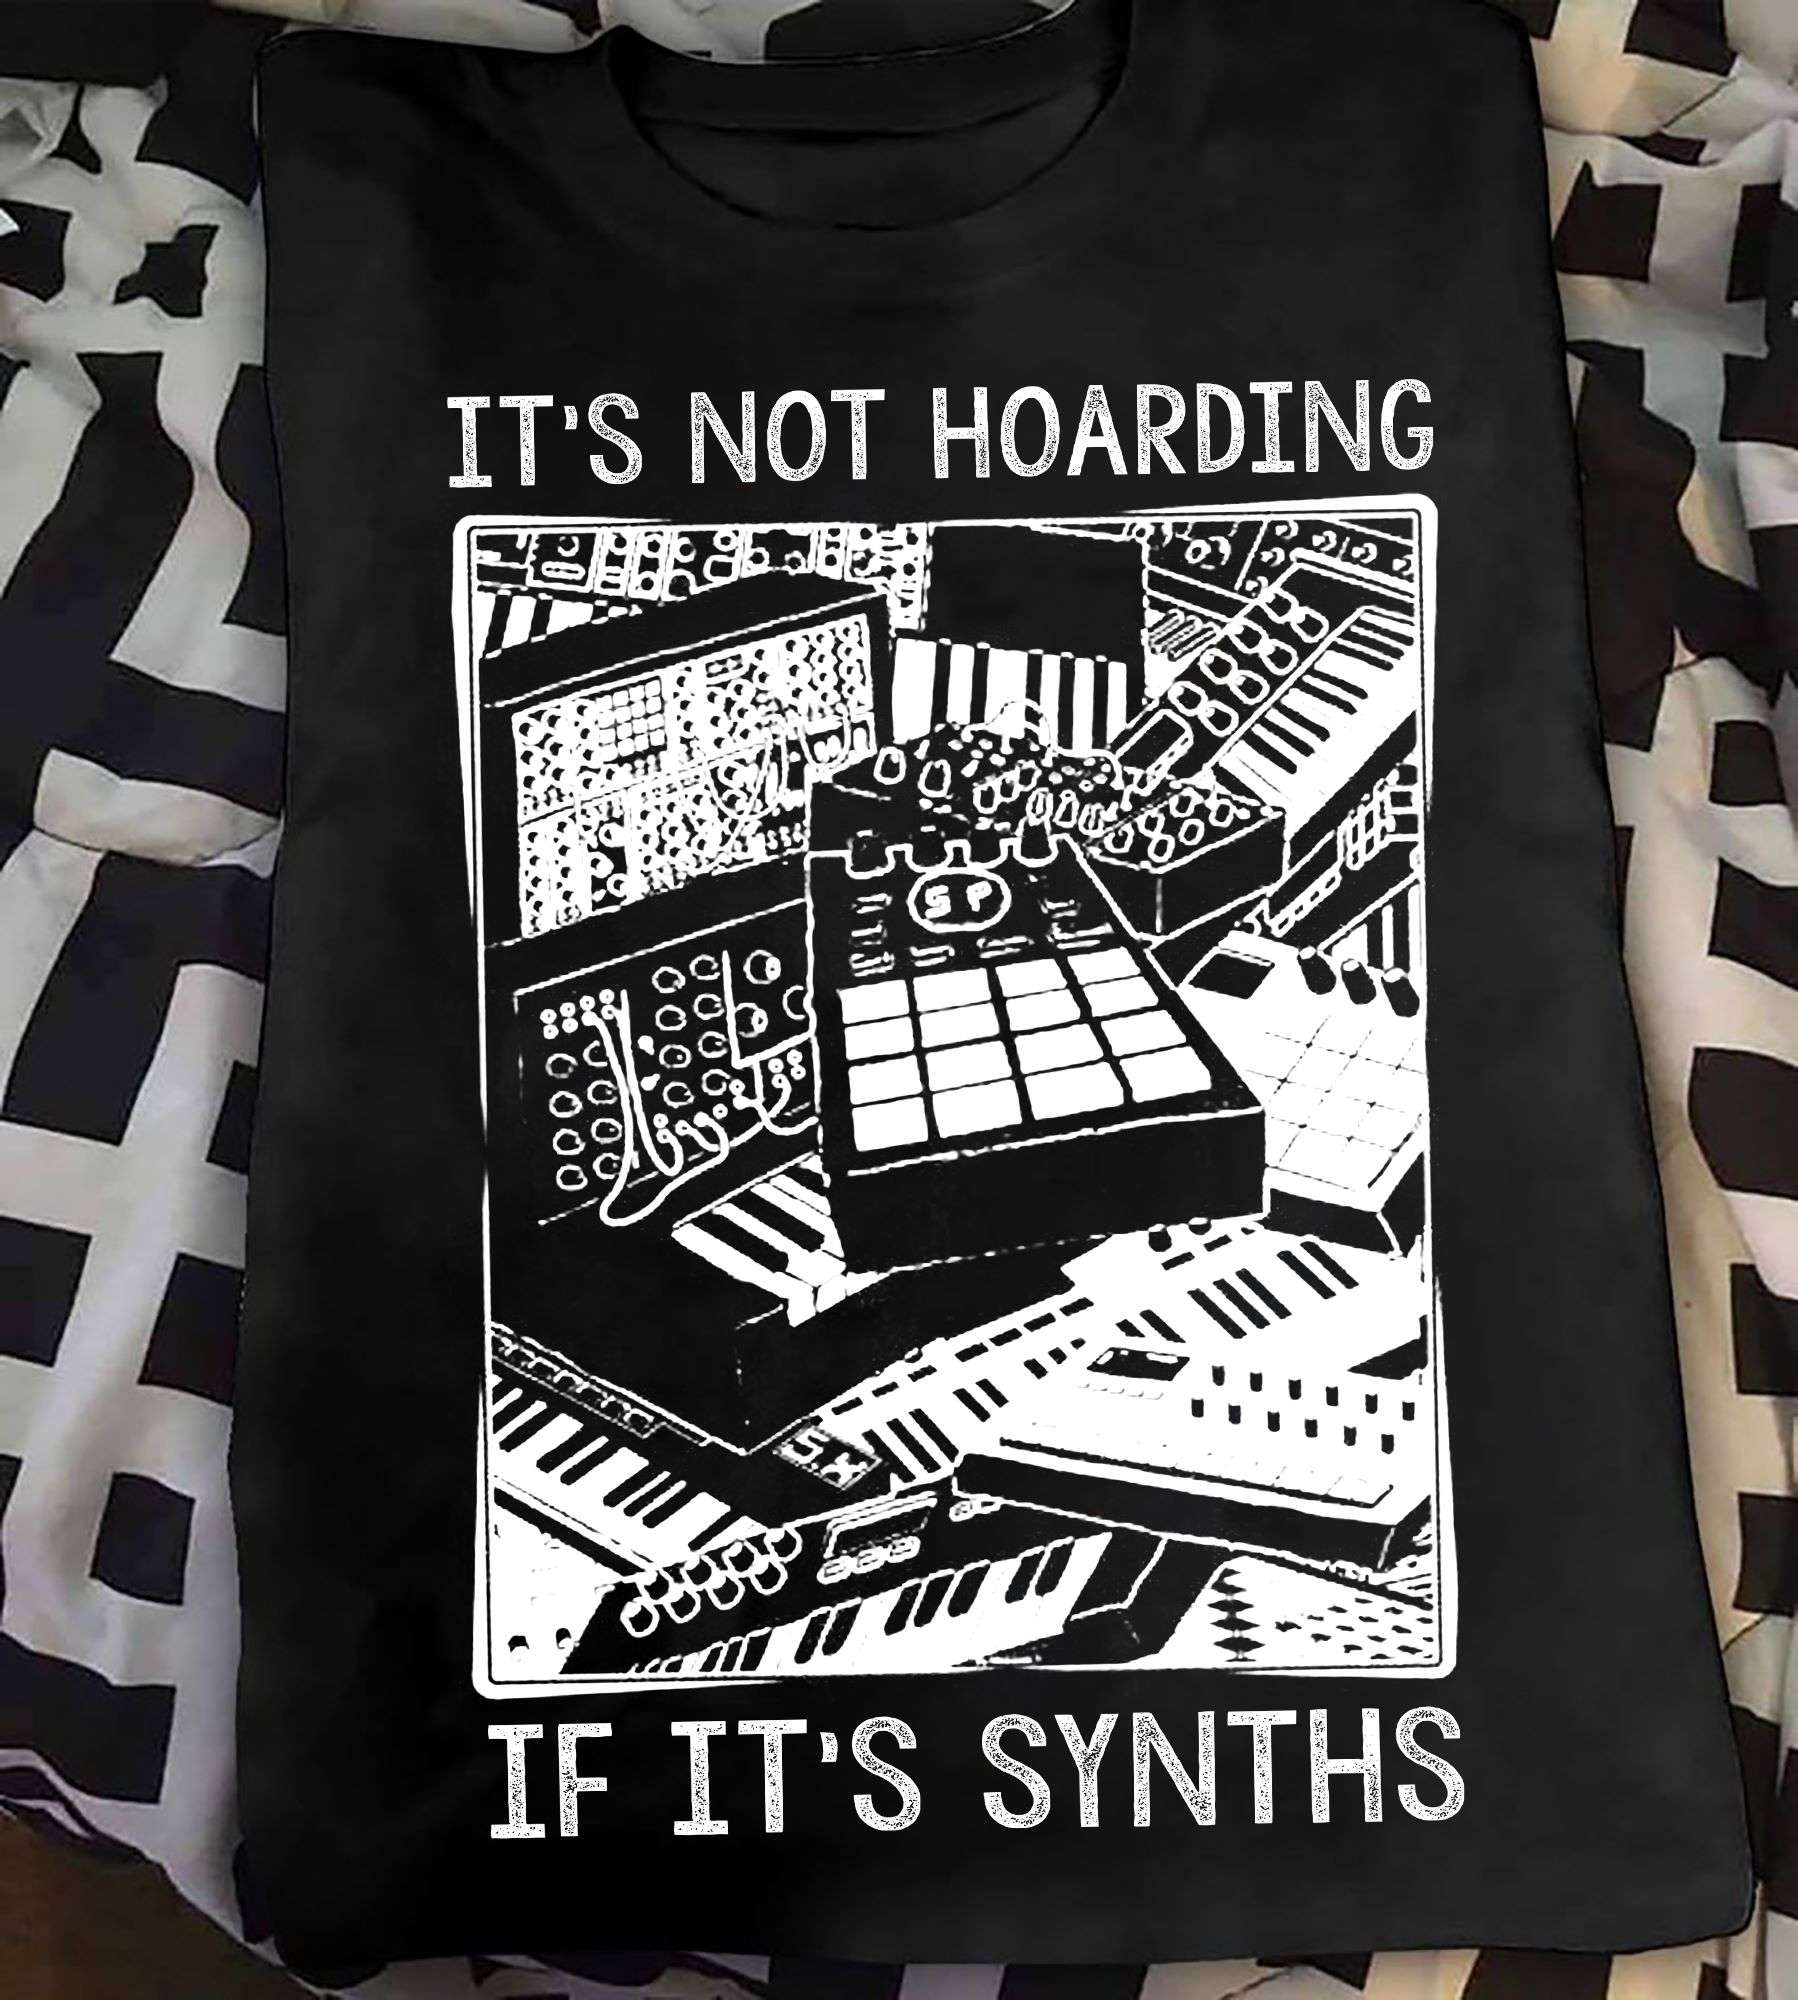 It's not hoarding if it's synths - Synth the intrument, synth music playing